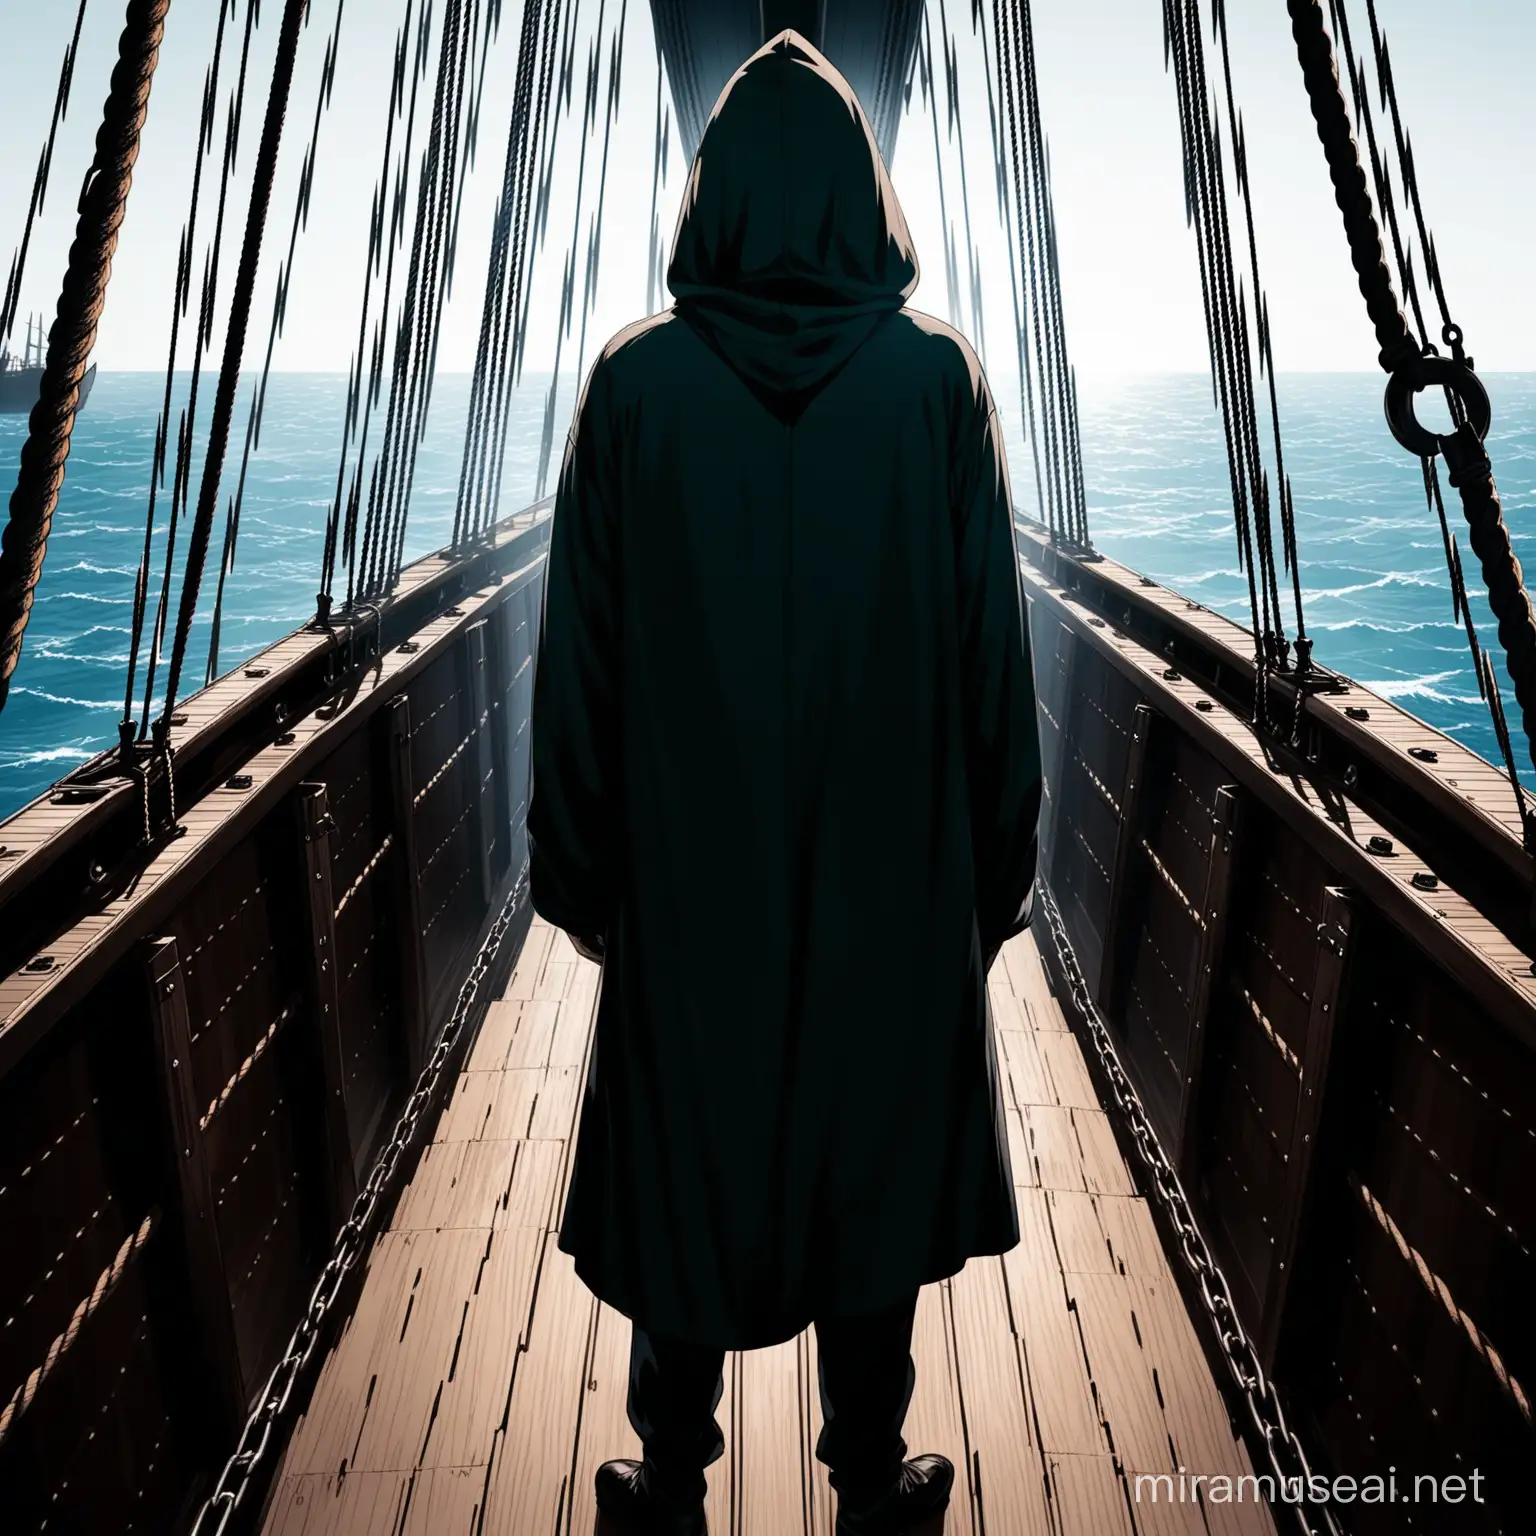 A man with no face that is just black with hoodie standing at the rail of a Galleon ship